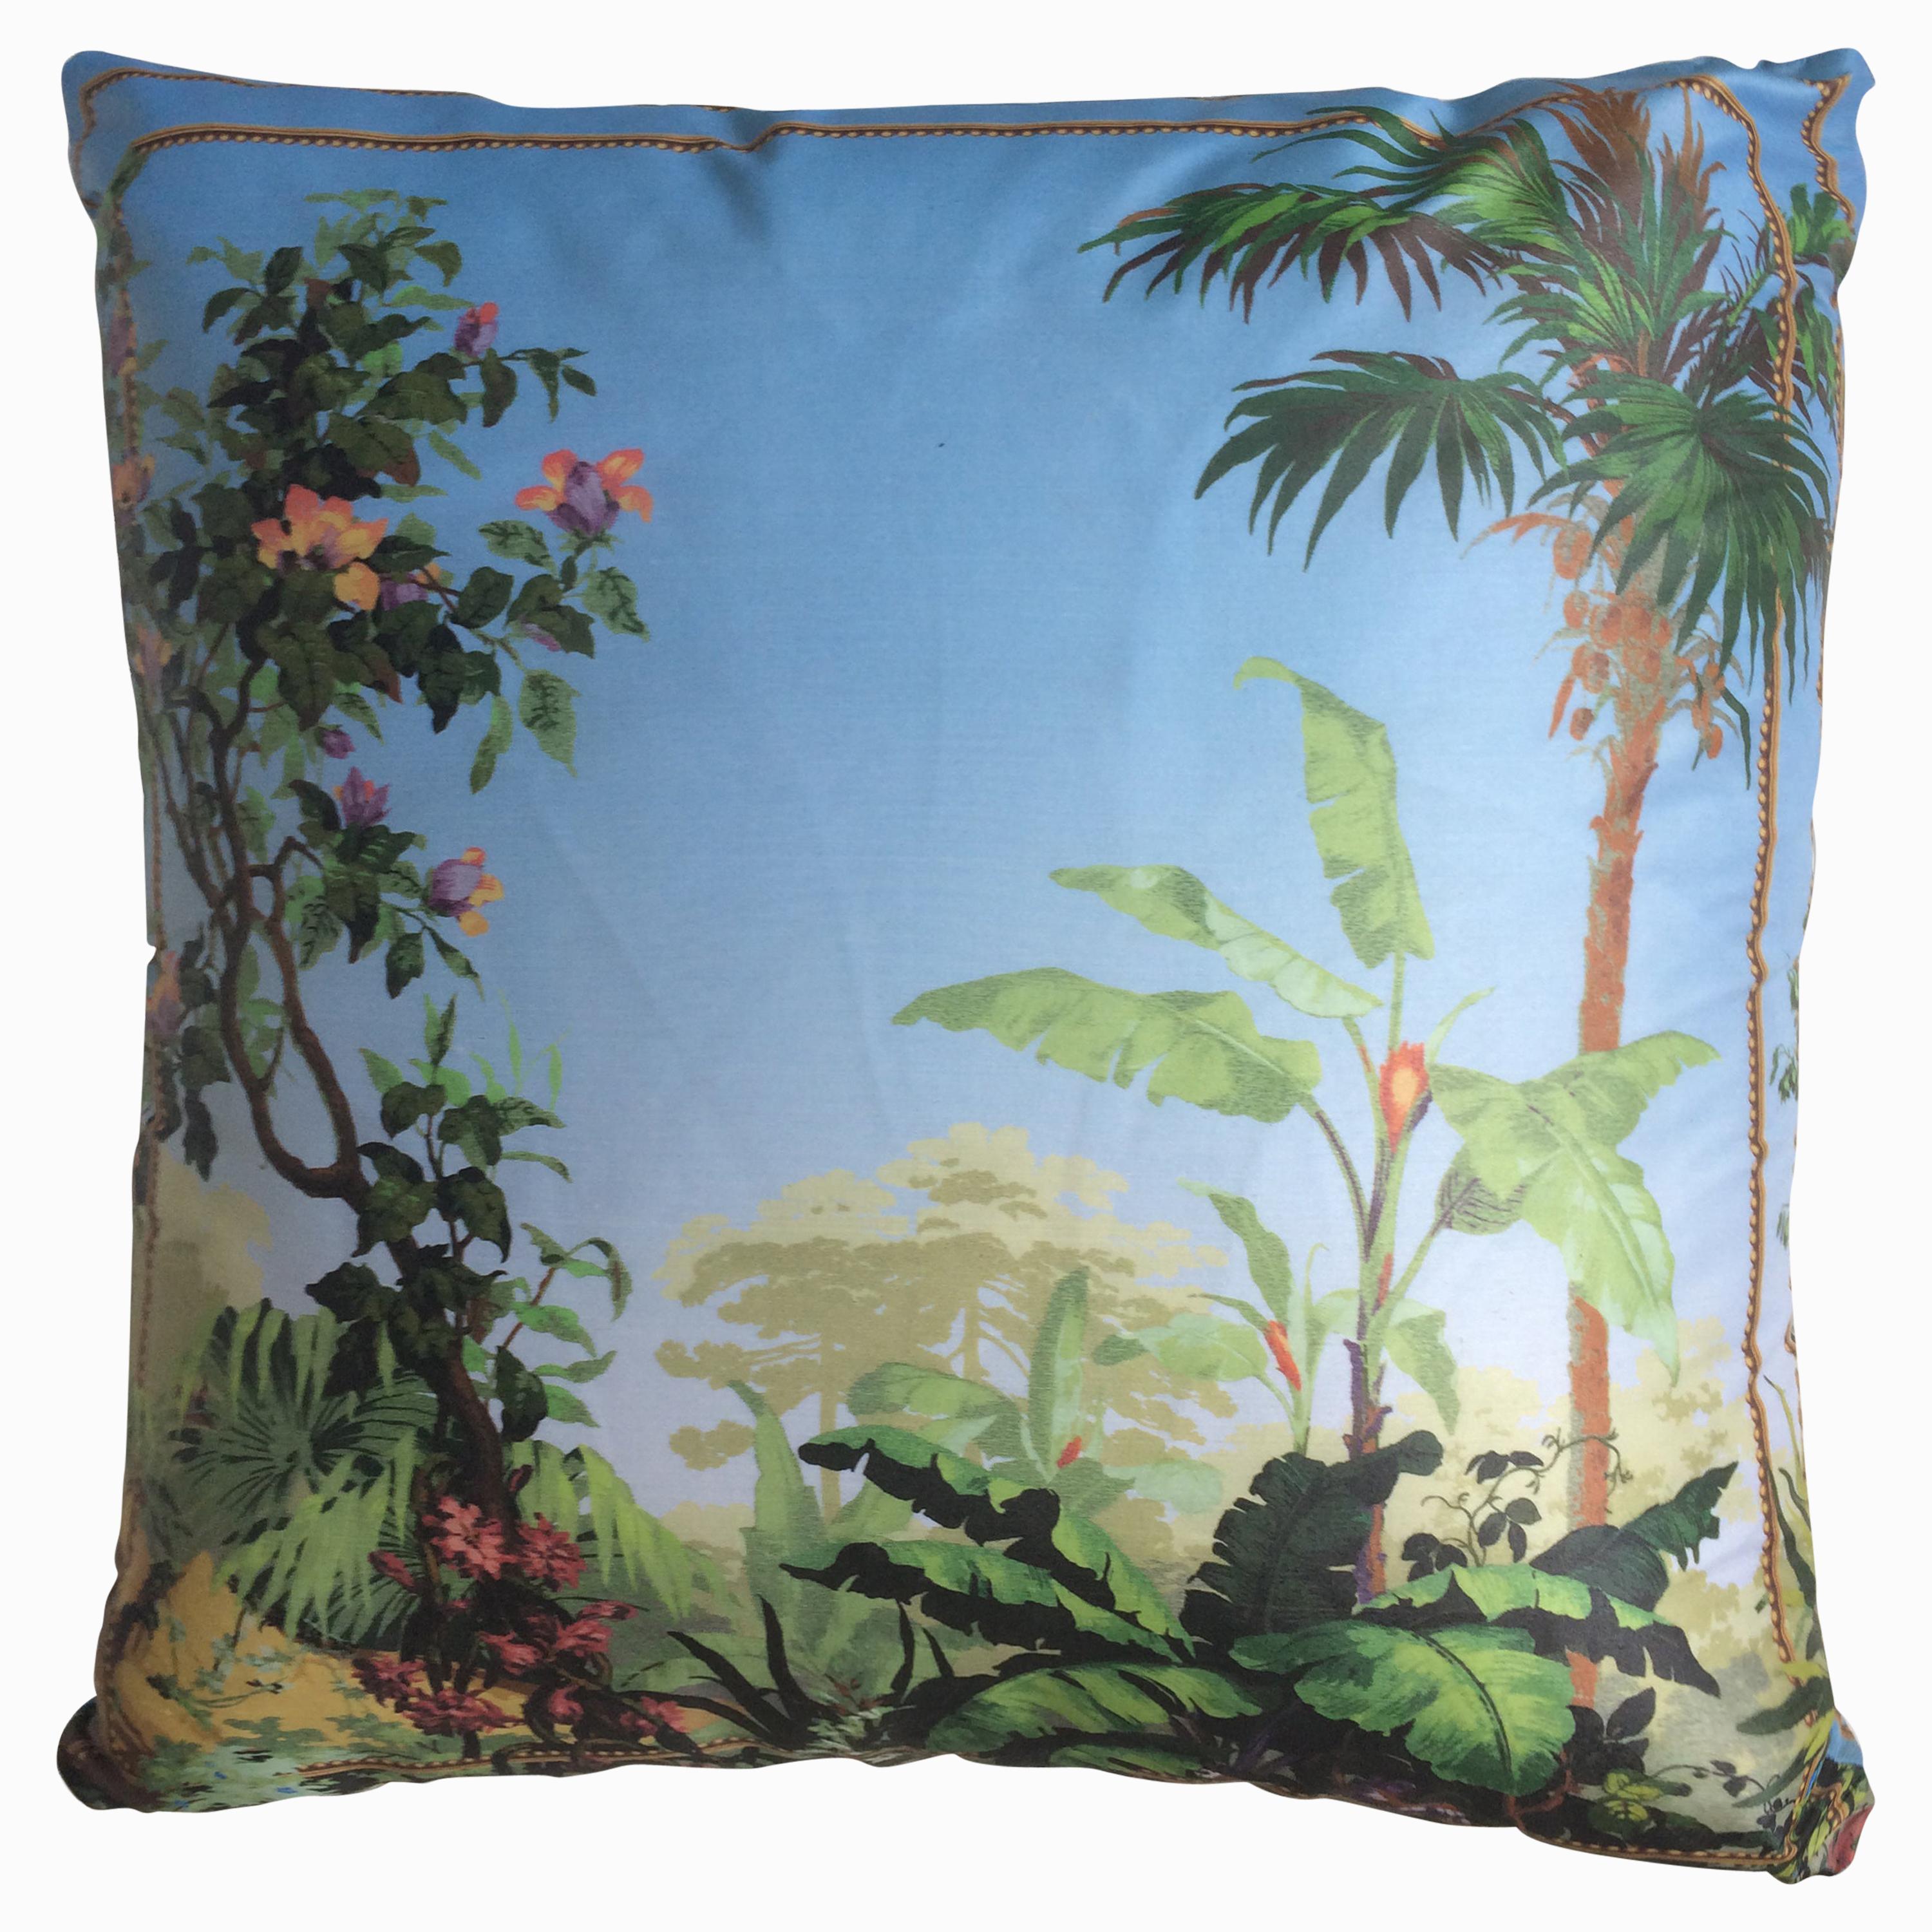 "Isola Bella Palm" Silk Throw Pillow in Polychrome by Zuber For Sale